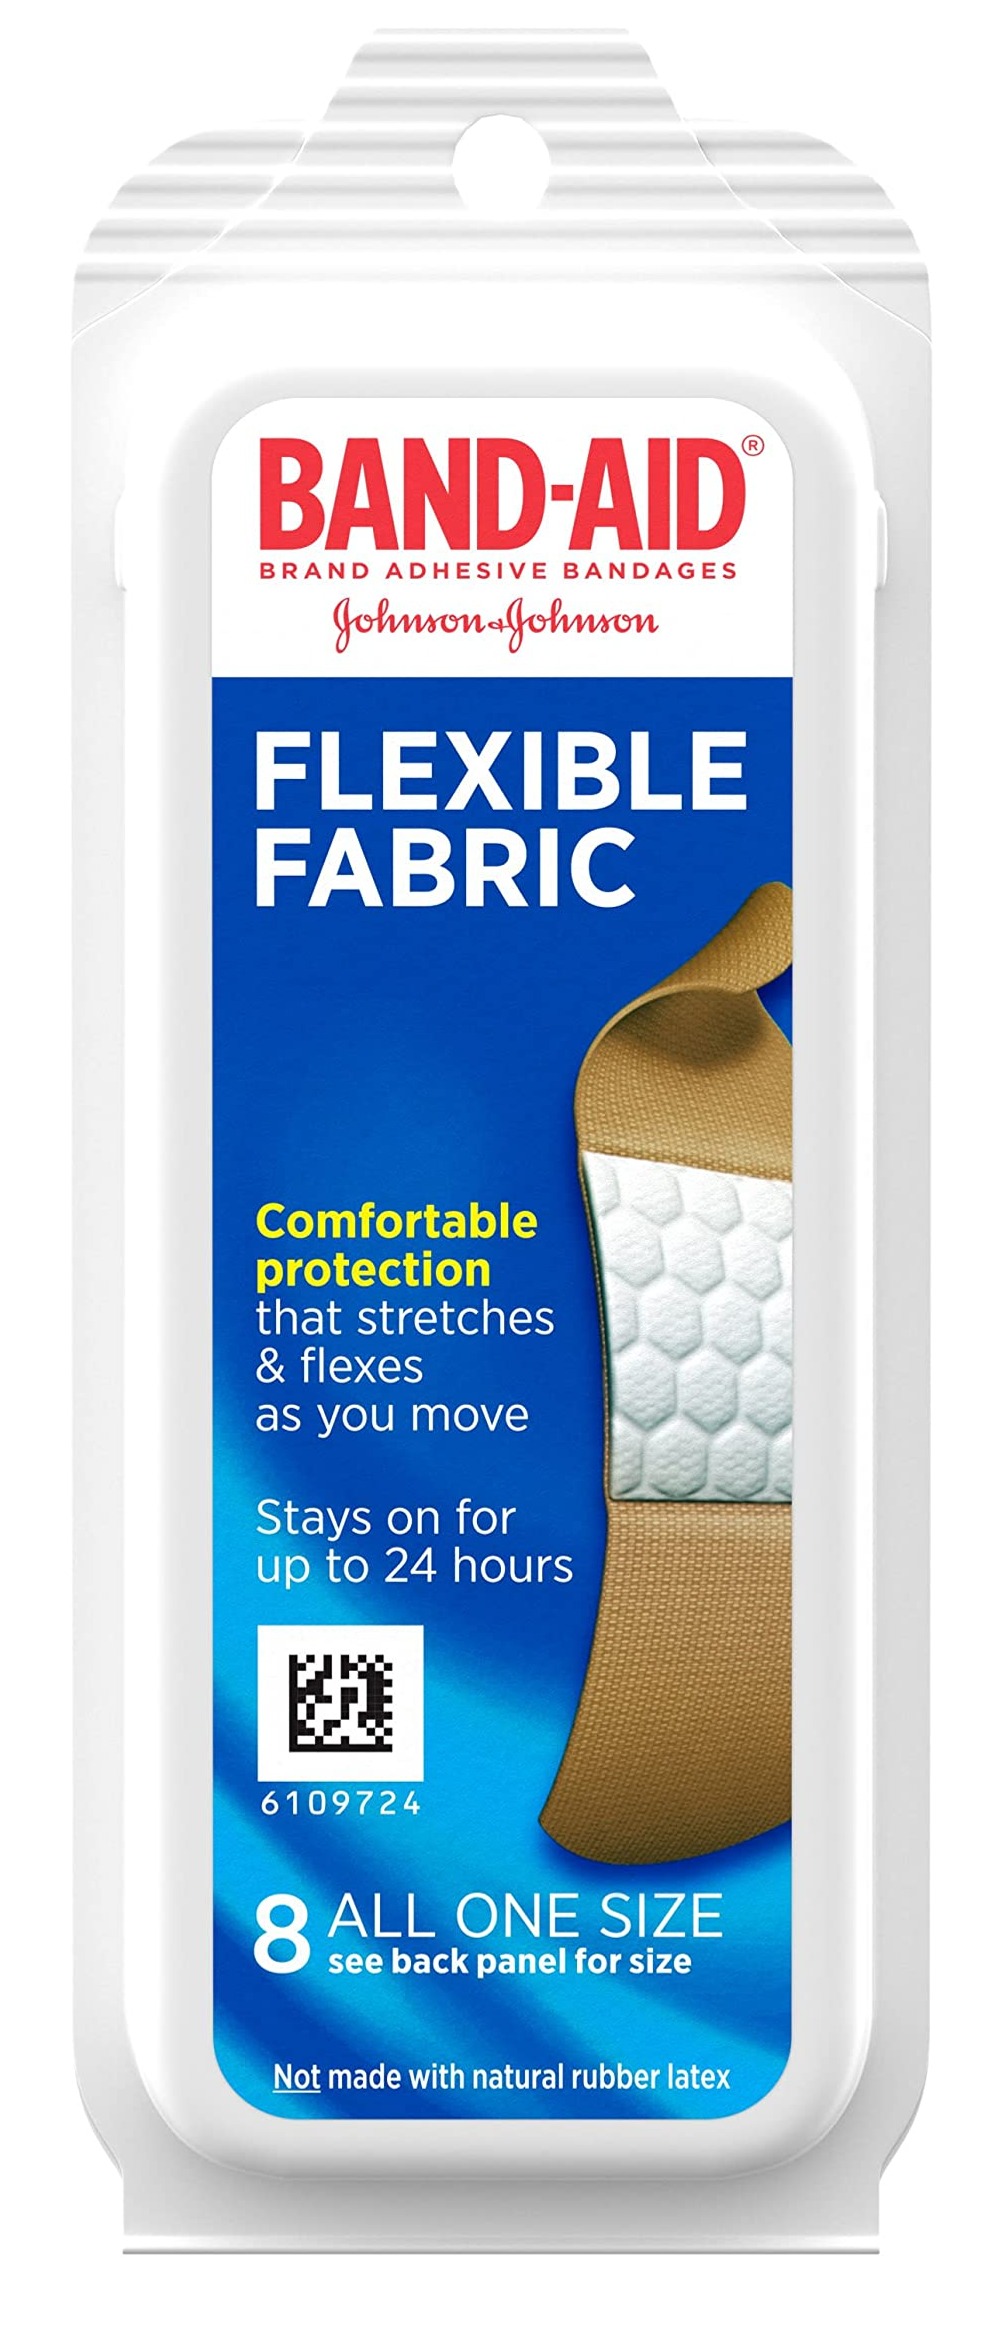 Band-Aid Brand Flexible Fabric Adhesive Bandages for Wound Care and First Aid, All One Size, 8 ct [Subscribe & Save] $0.94